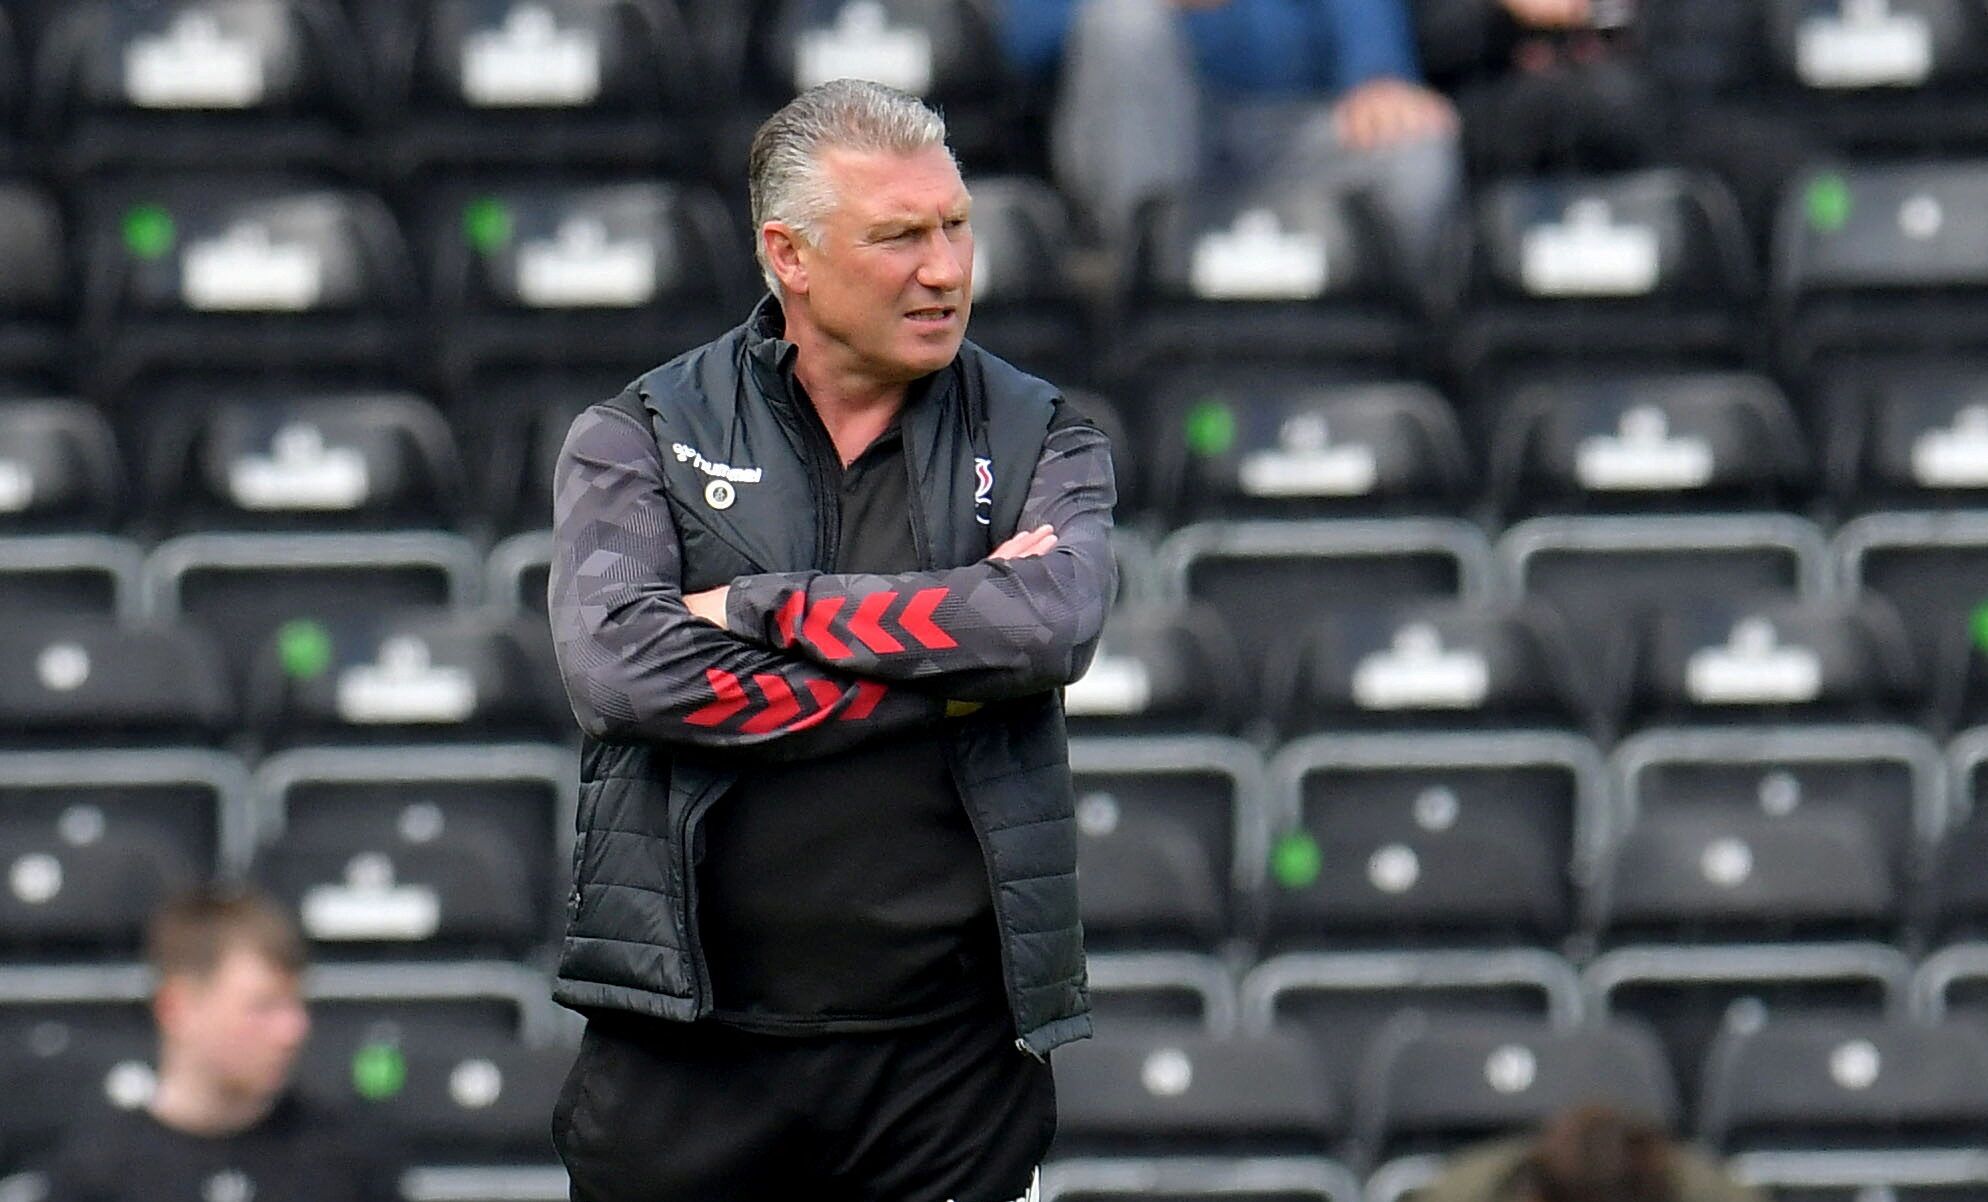 Soccer Football - Championship - Derby County v Bristol City - Pride Park, Derby, Britain - April 23, 2022 Bristol City manager Nigel Pearson before the match   Action Images/Paul Burrows  EDITORIAL USE ONLY. No use with unauthorized audio, video, data, fixture lists, club/league logos or 